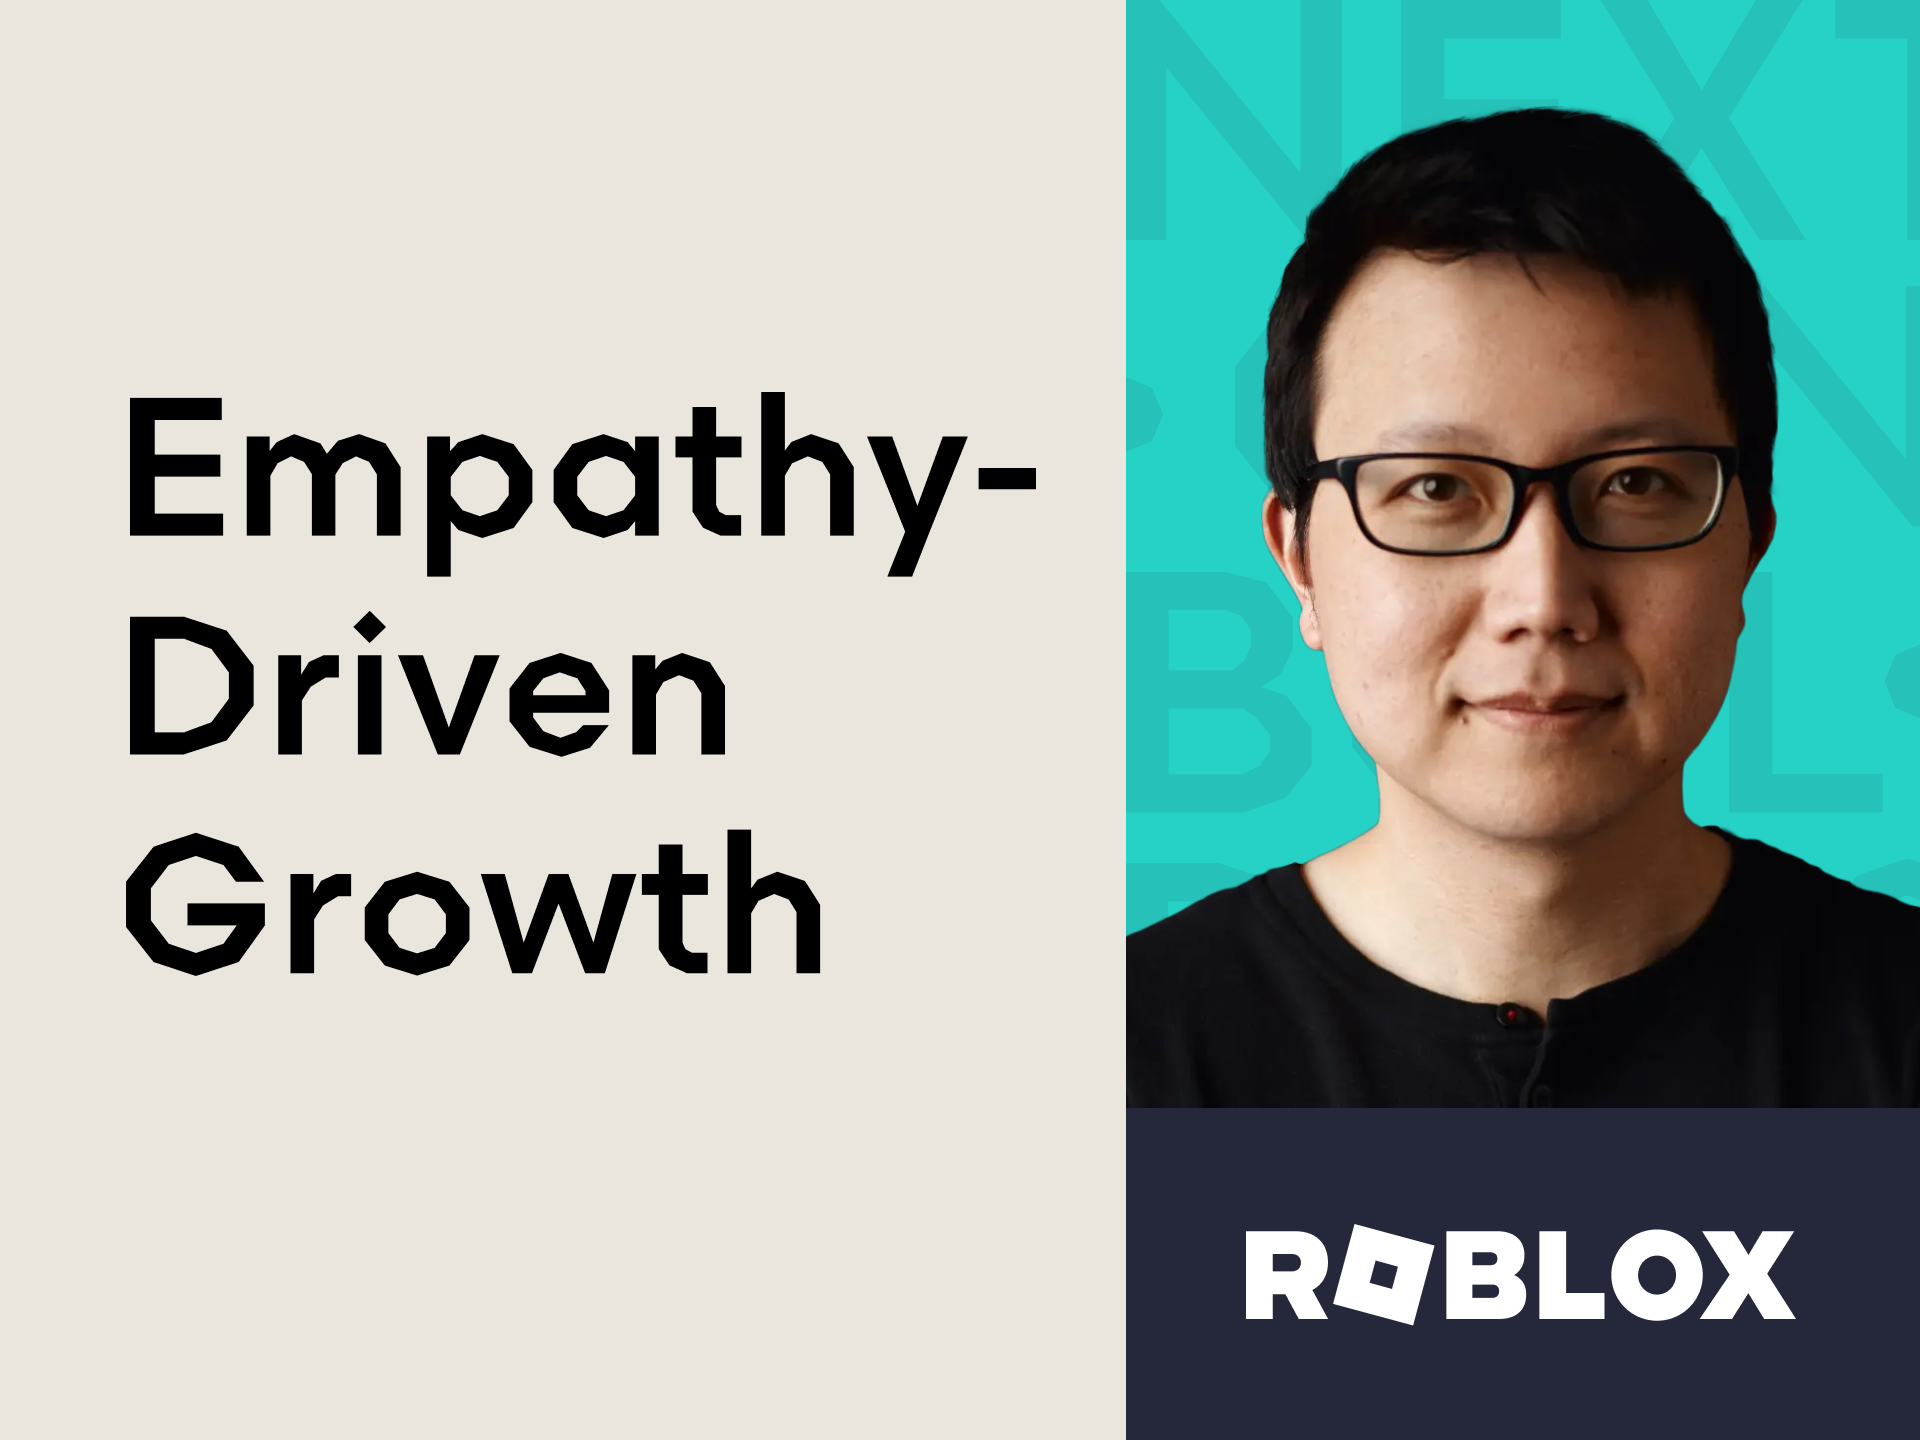 Text saying "empathy-driven growth" with Peter Yang's headshot and title